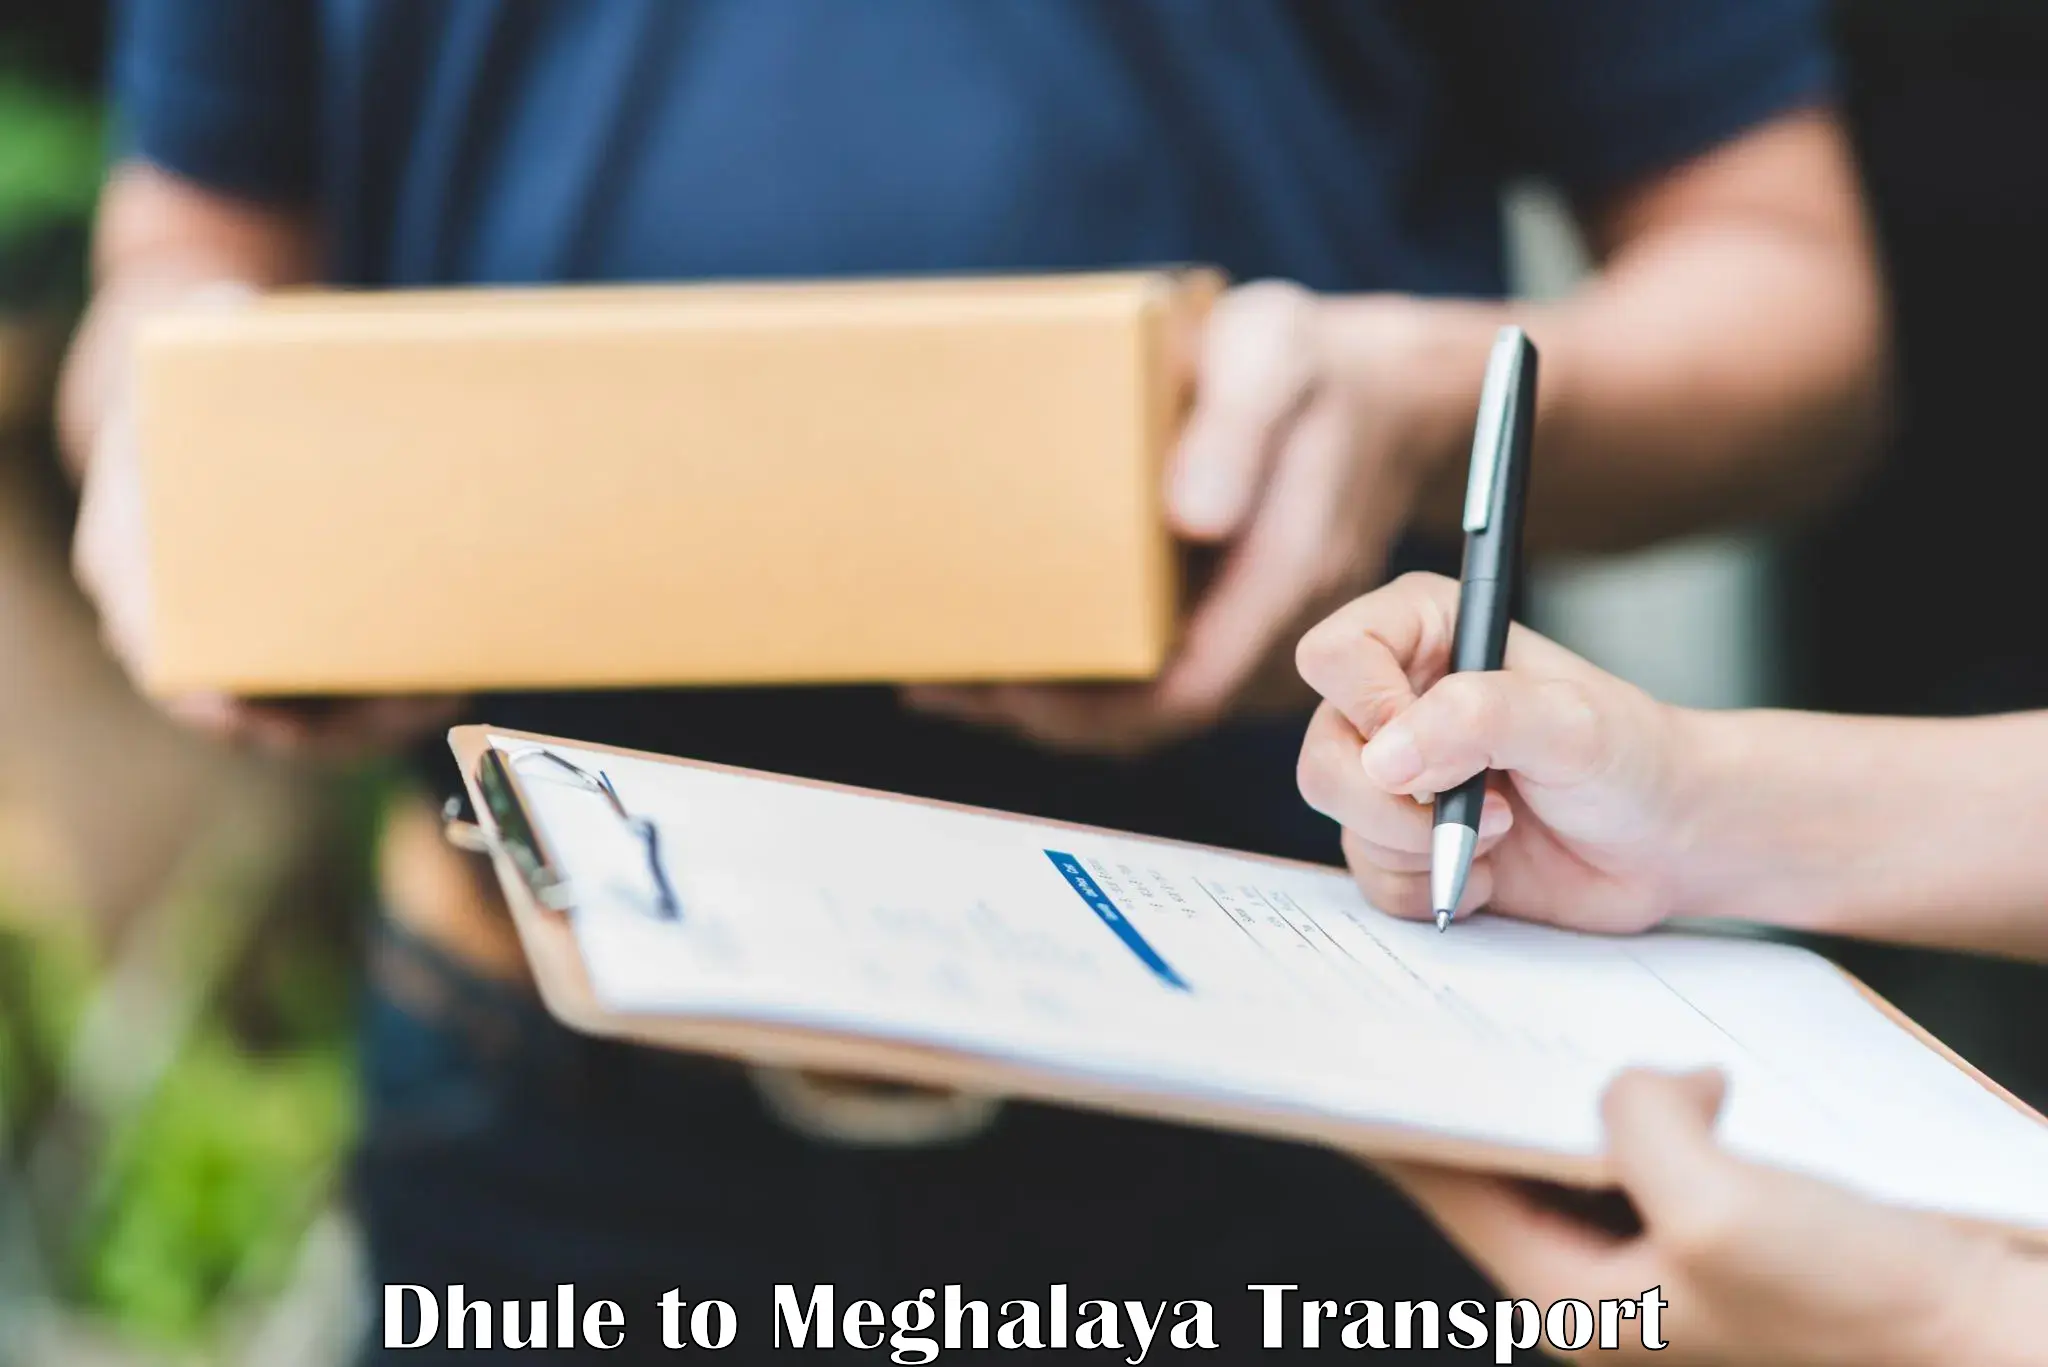 Daily transport service Dhule to Jaintia Hills